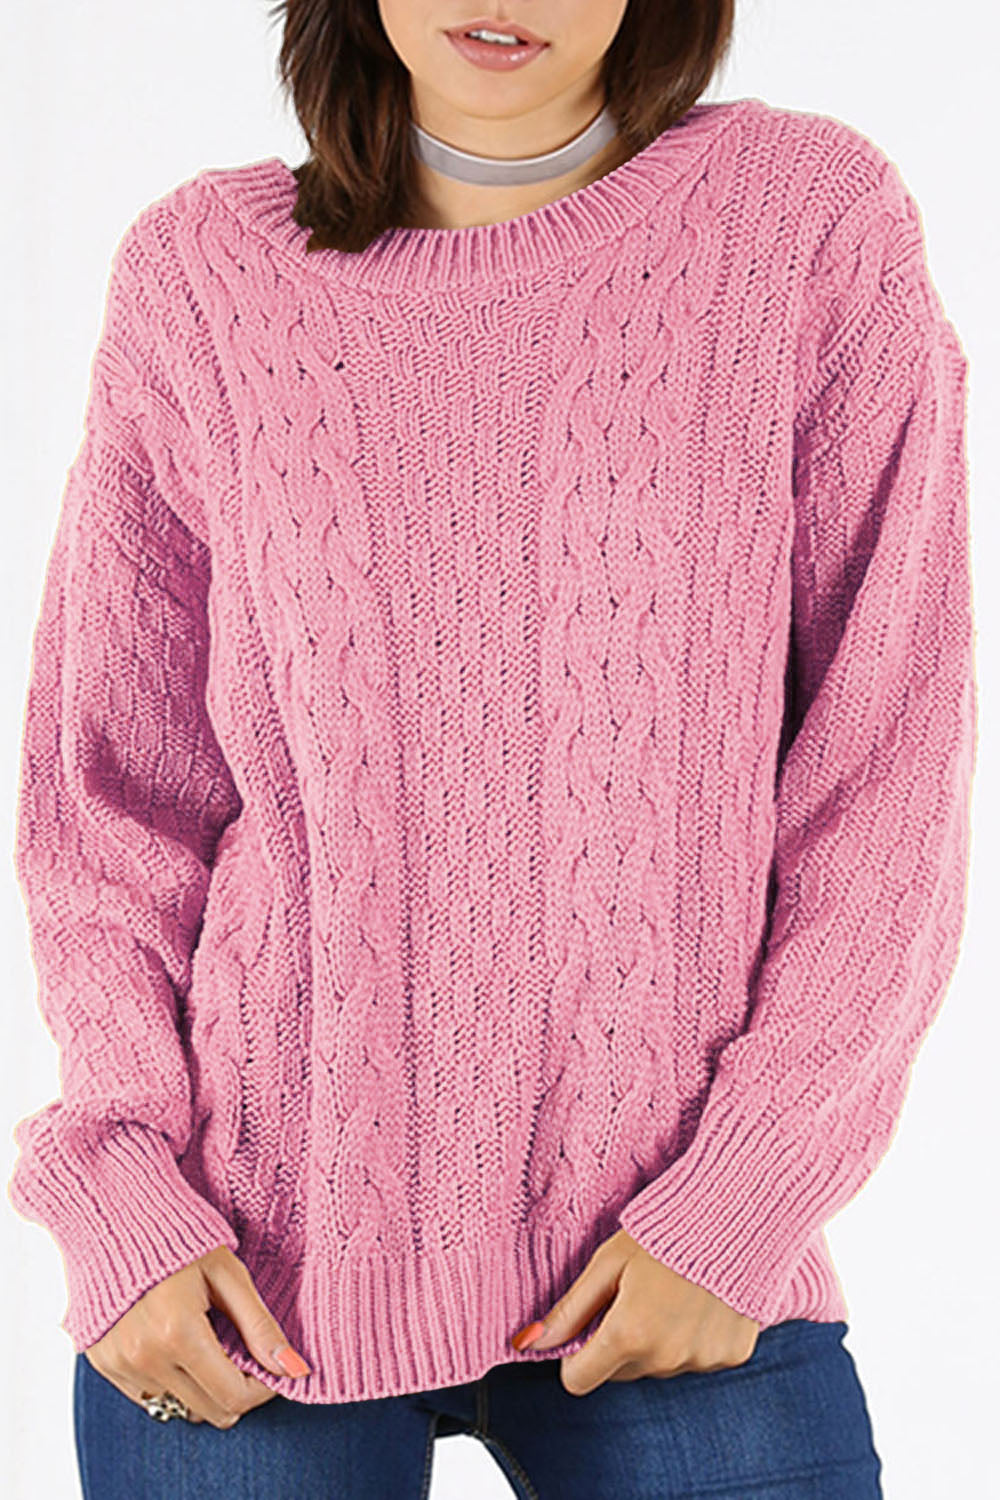 Long Sleeve Burgundy Cable Knit Jumper